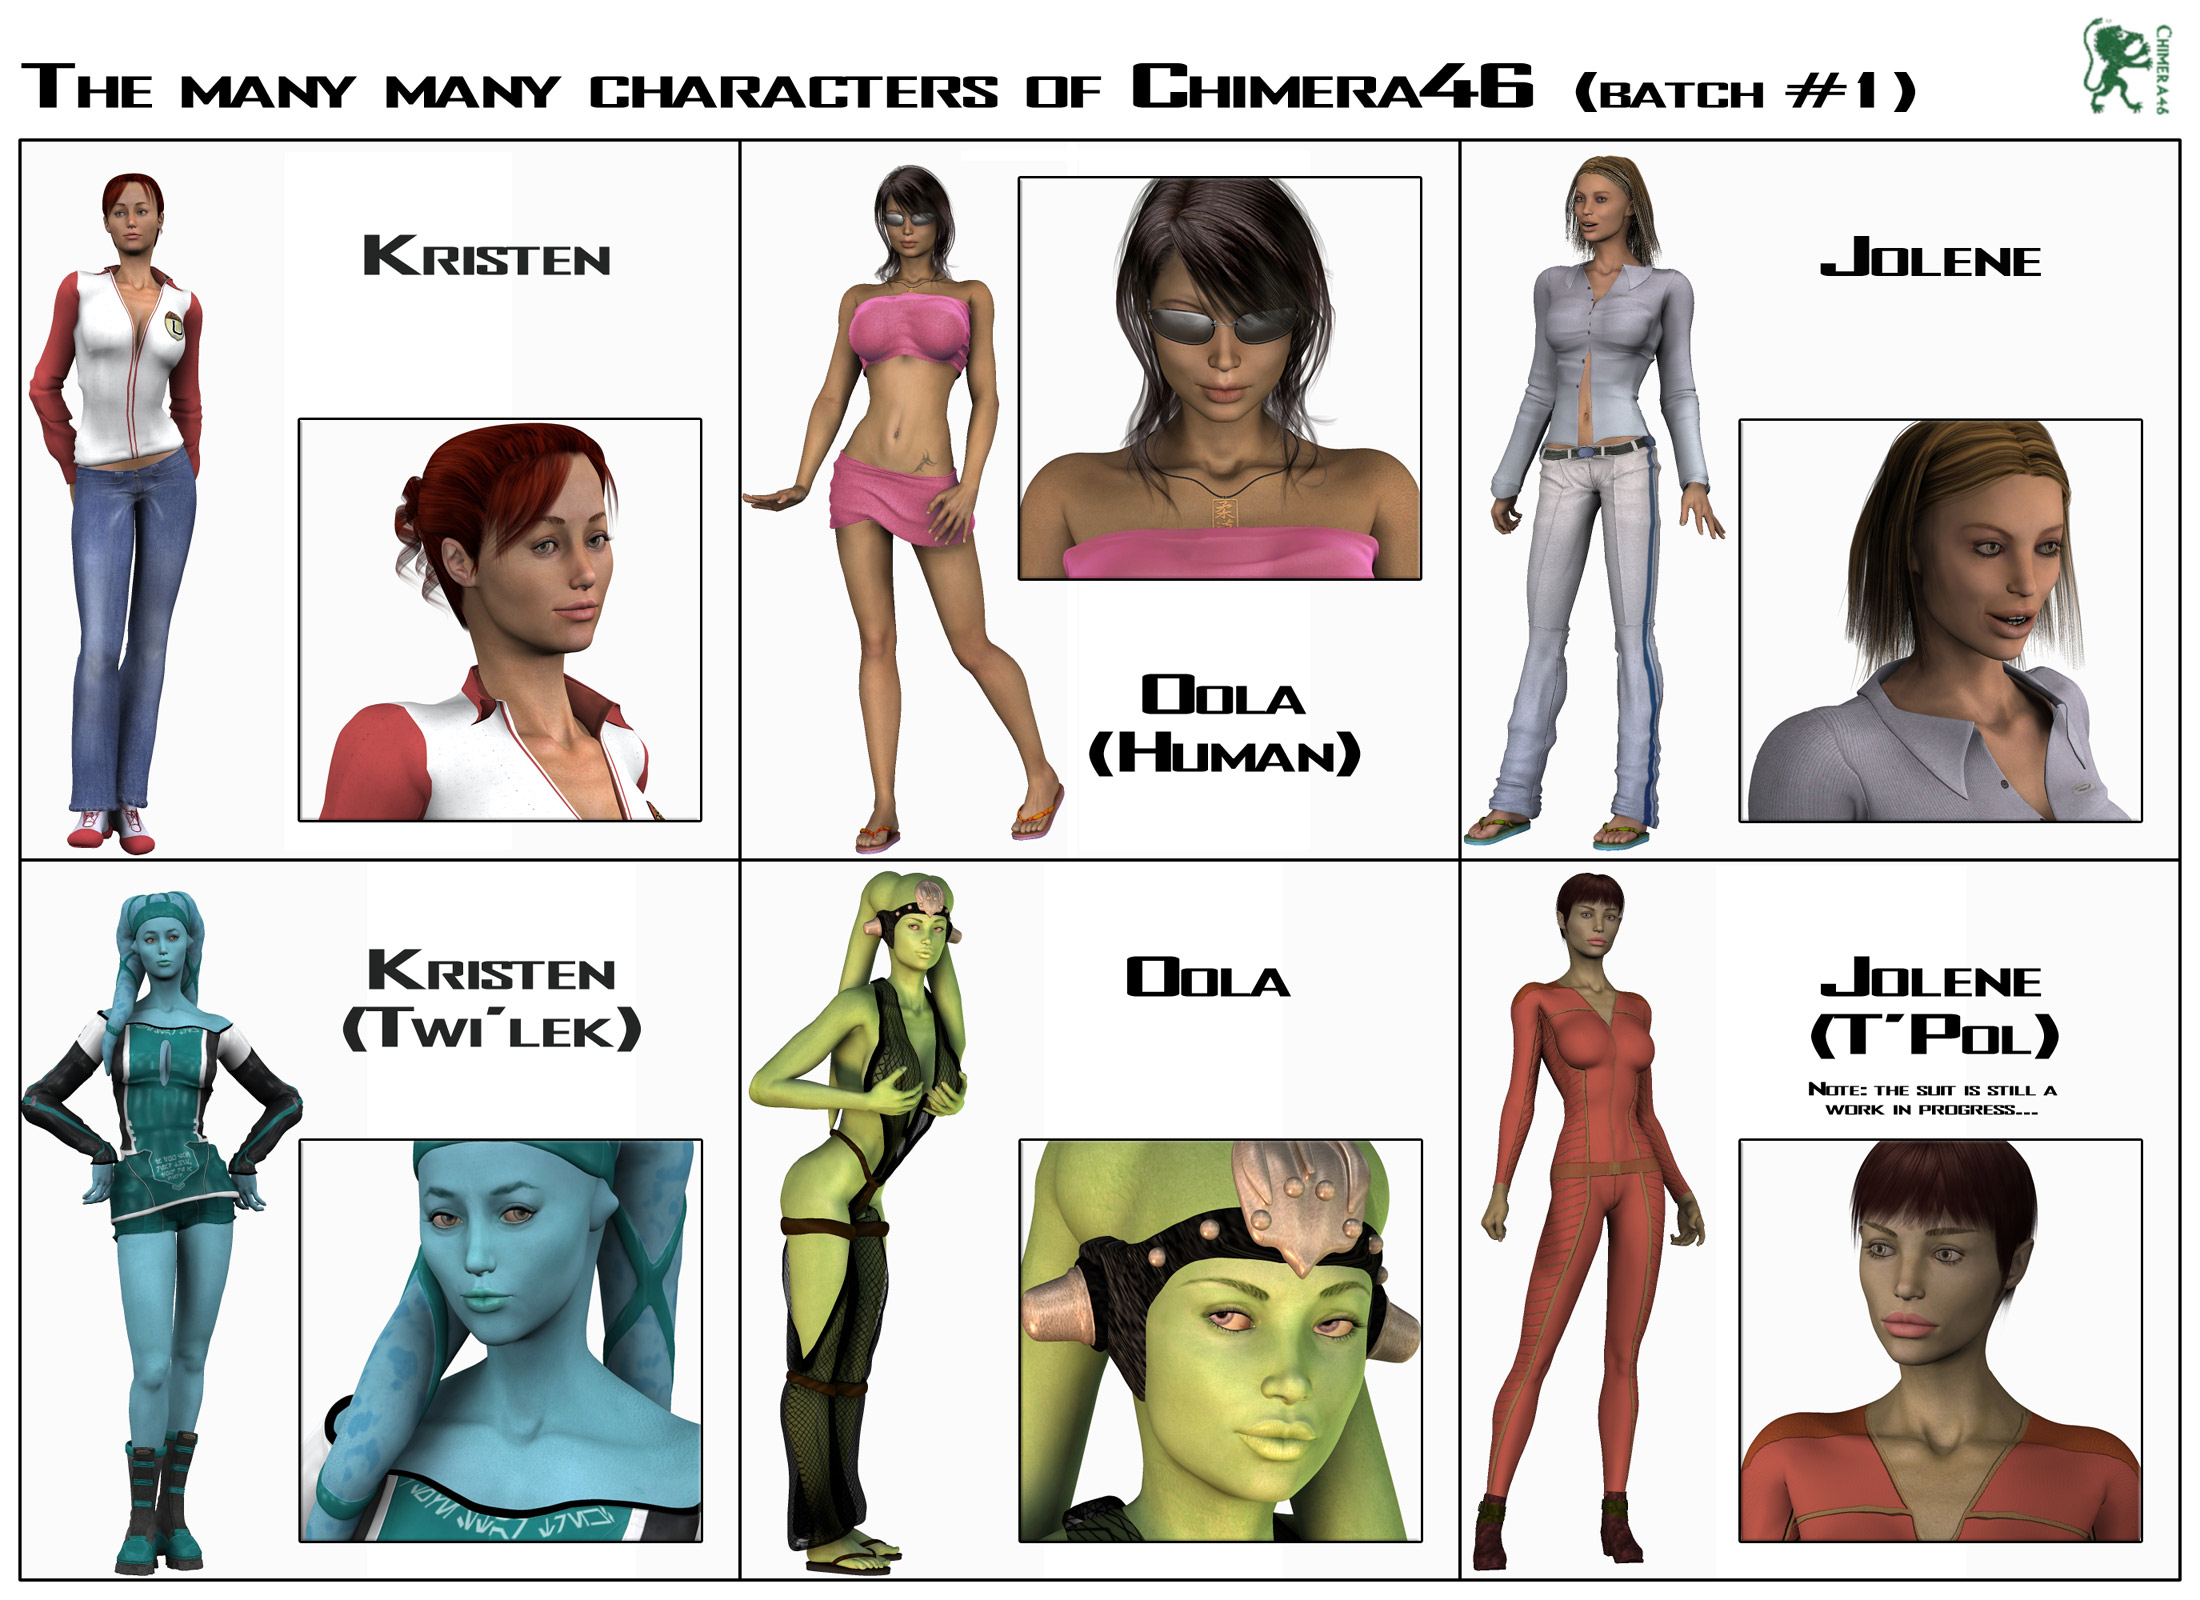 The Many Characters of Chimera46 (Batch 1)